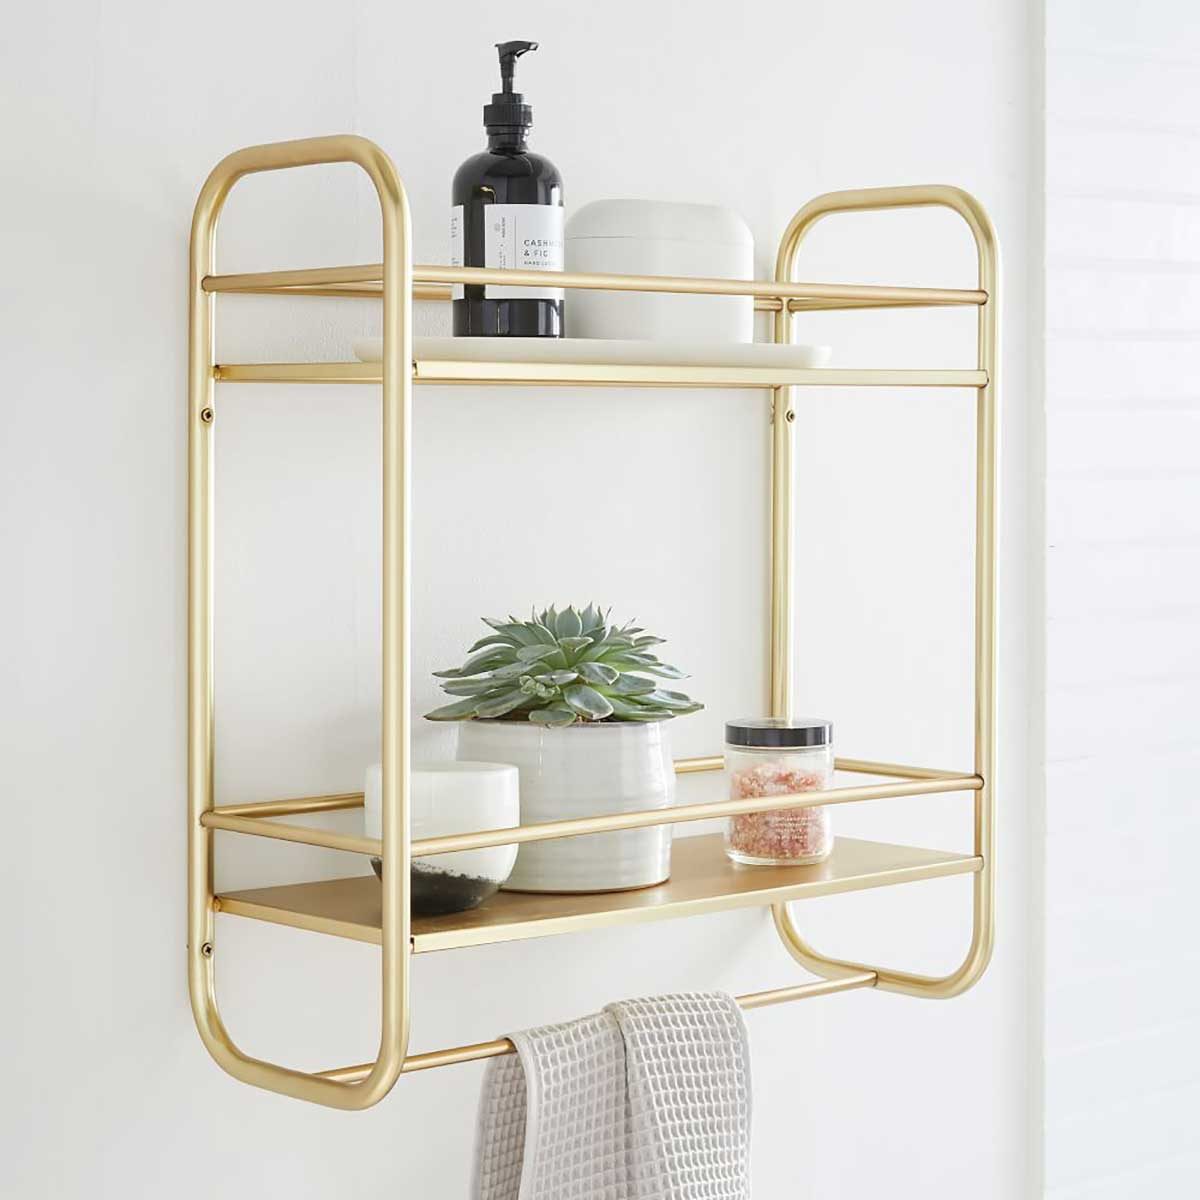 10 Best Above Toilet Storage Ideas, Over The Toilet Wire Shelving